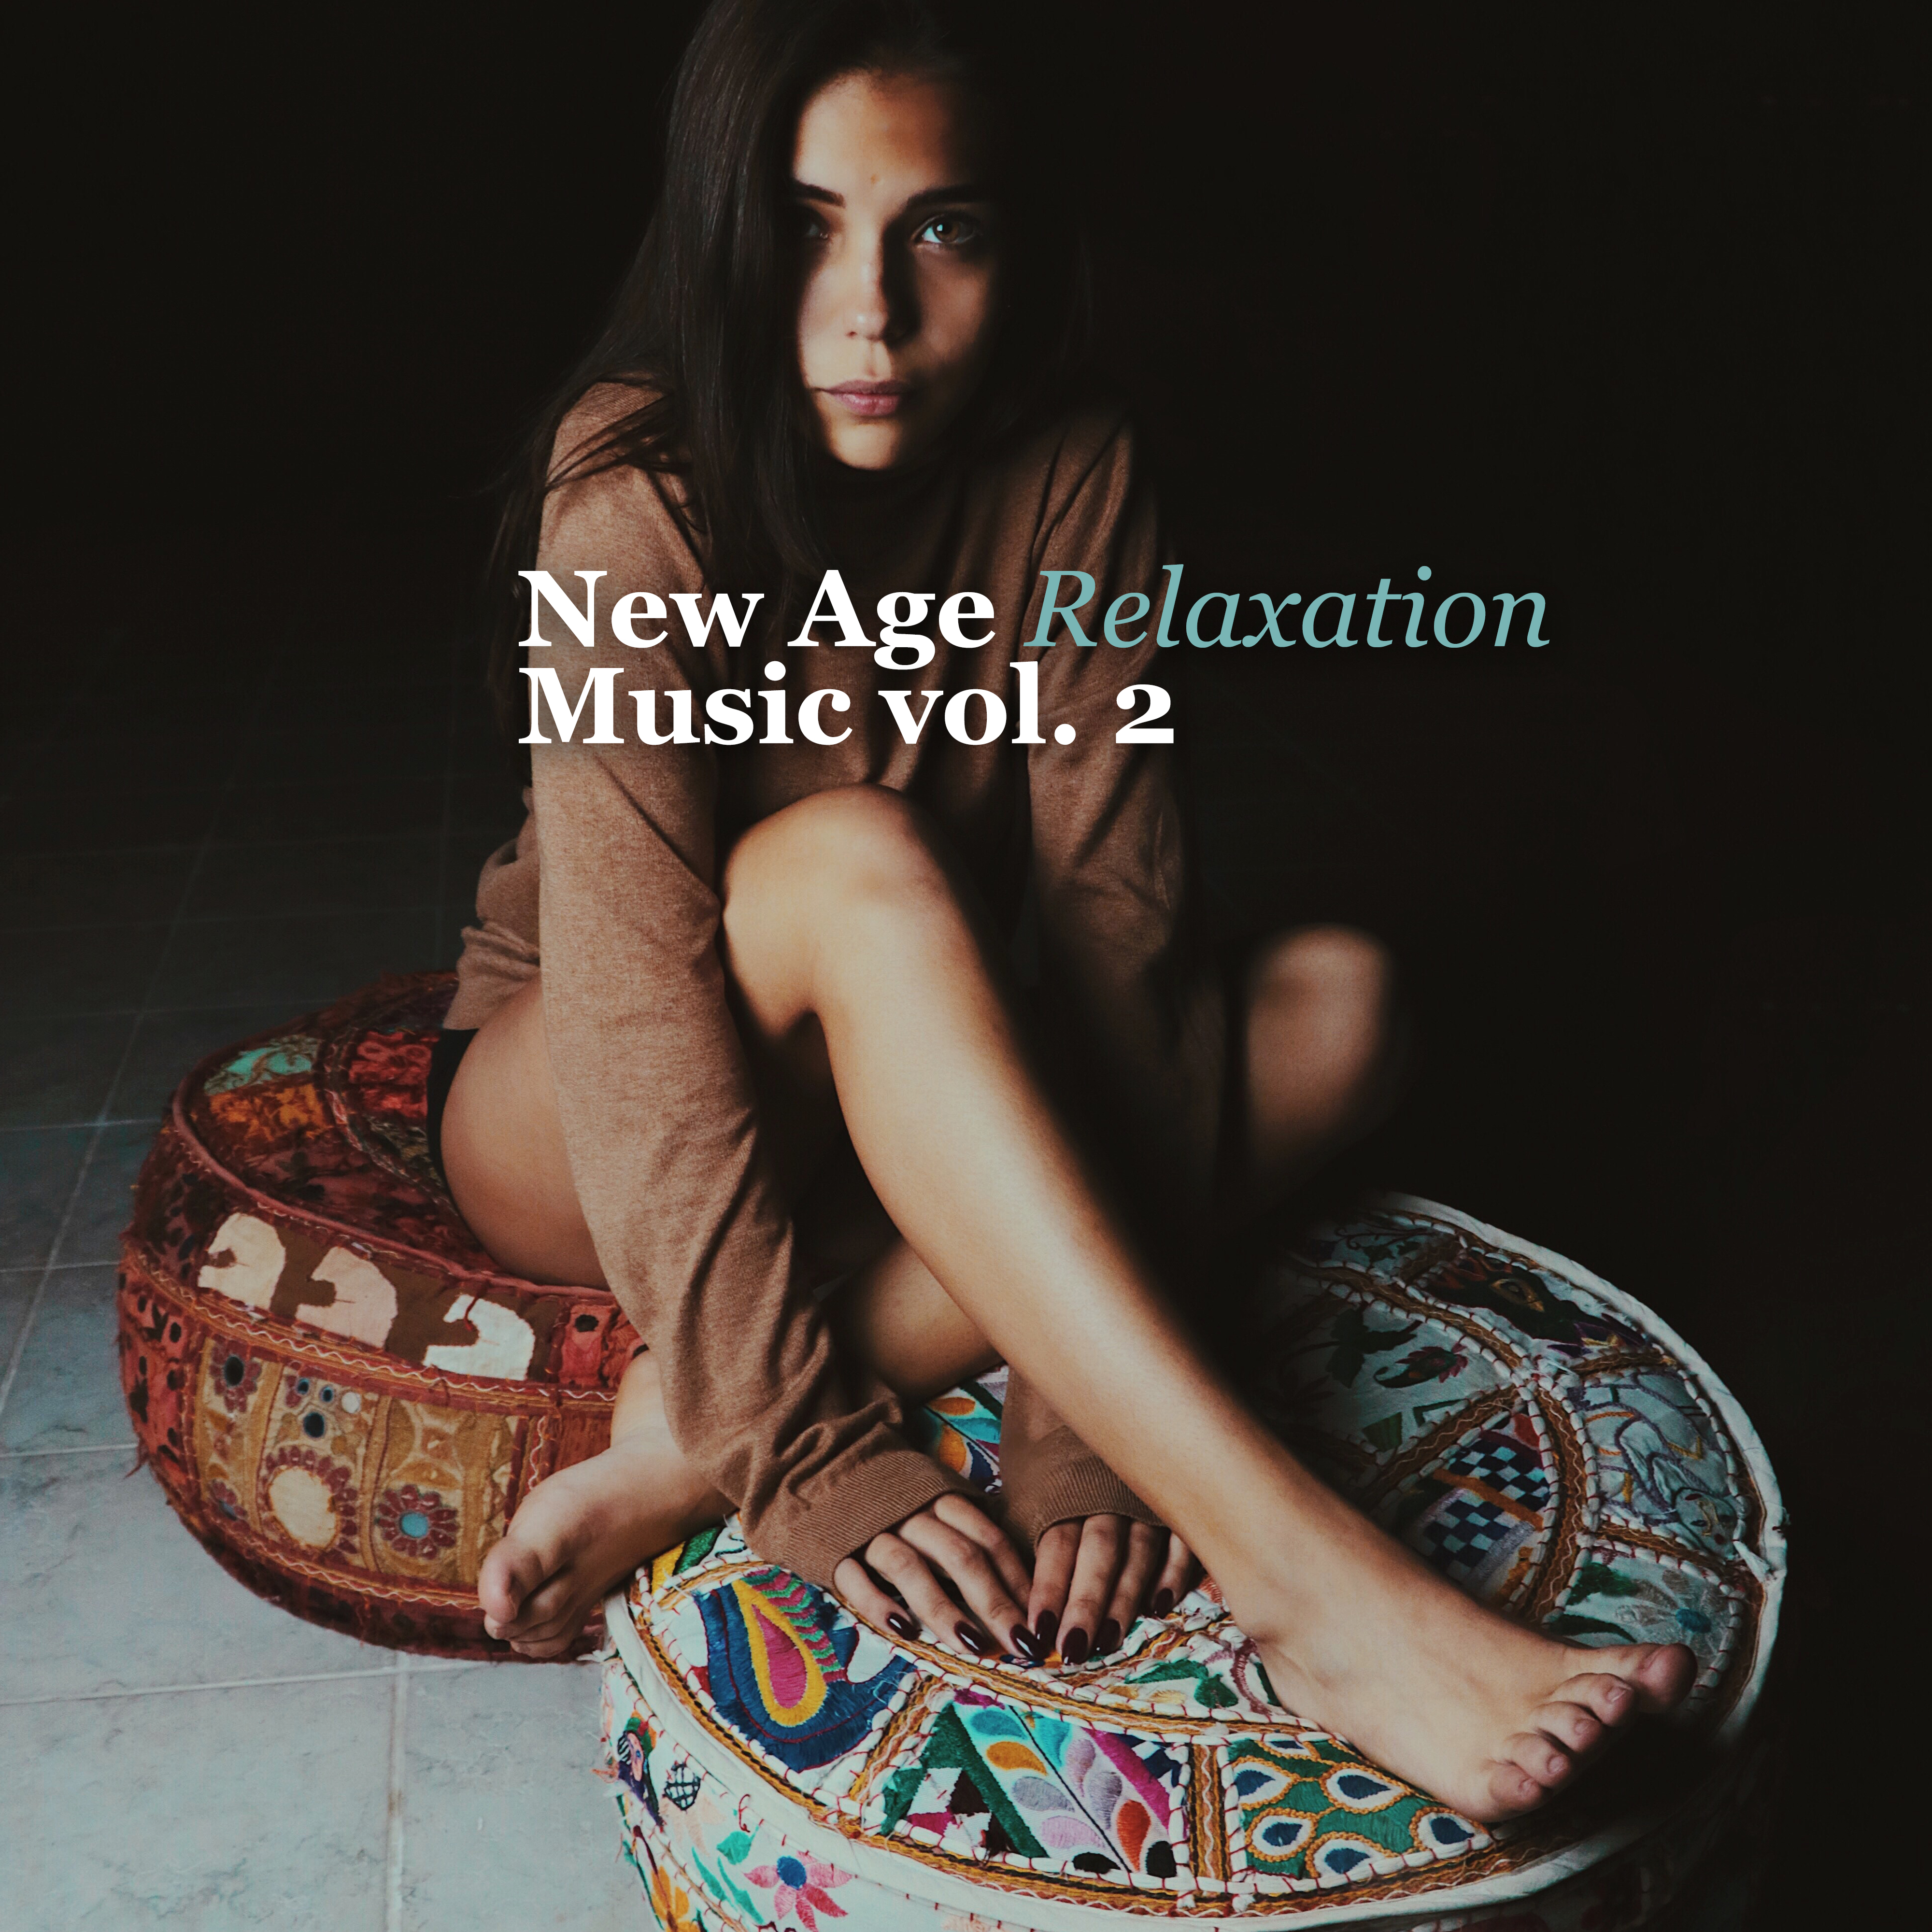 New Age Relaxation Music vol. 2